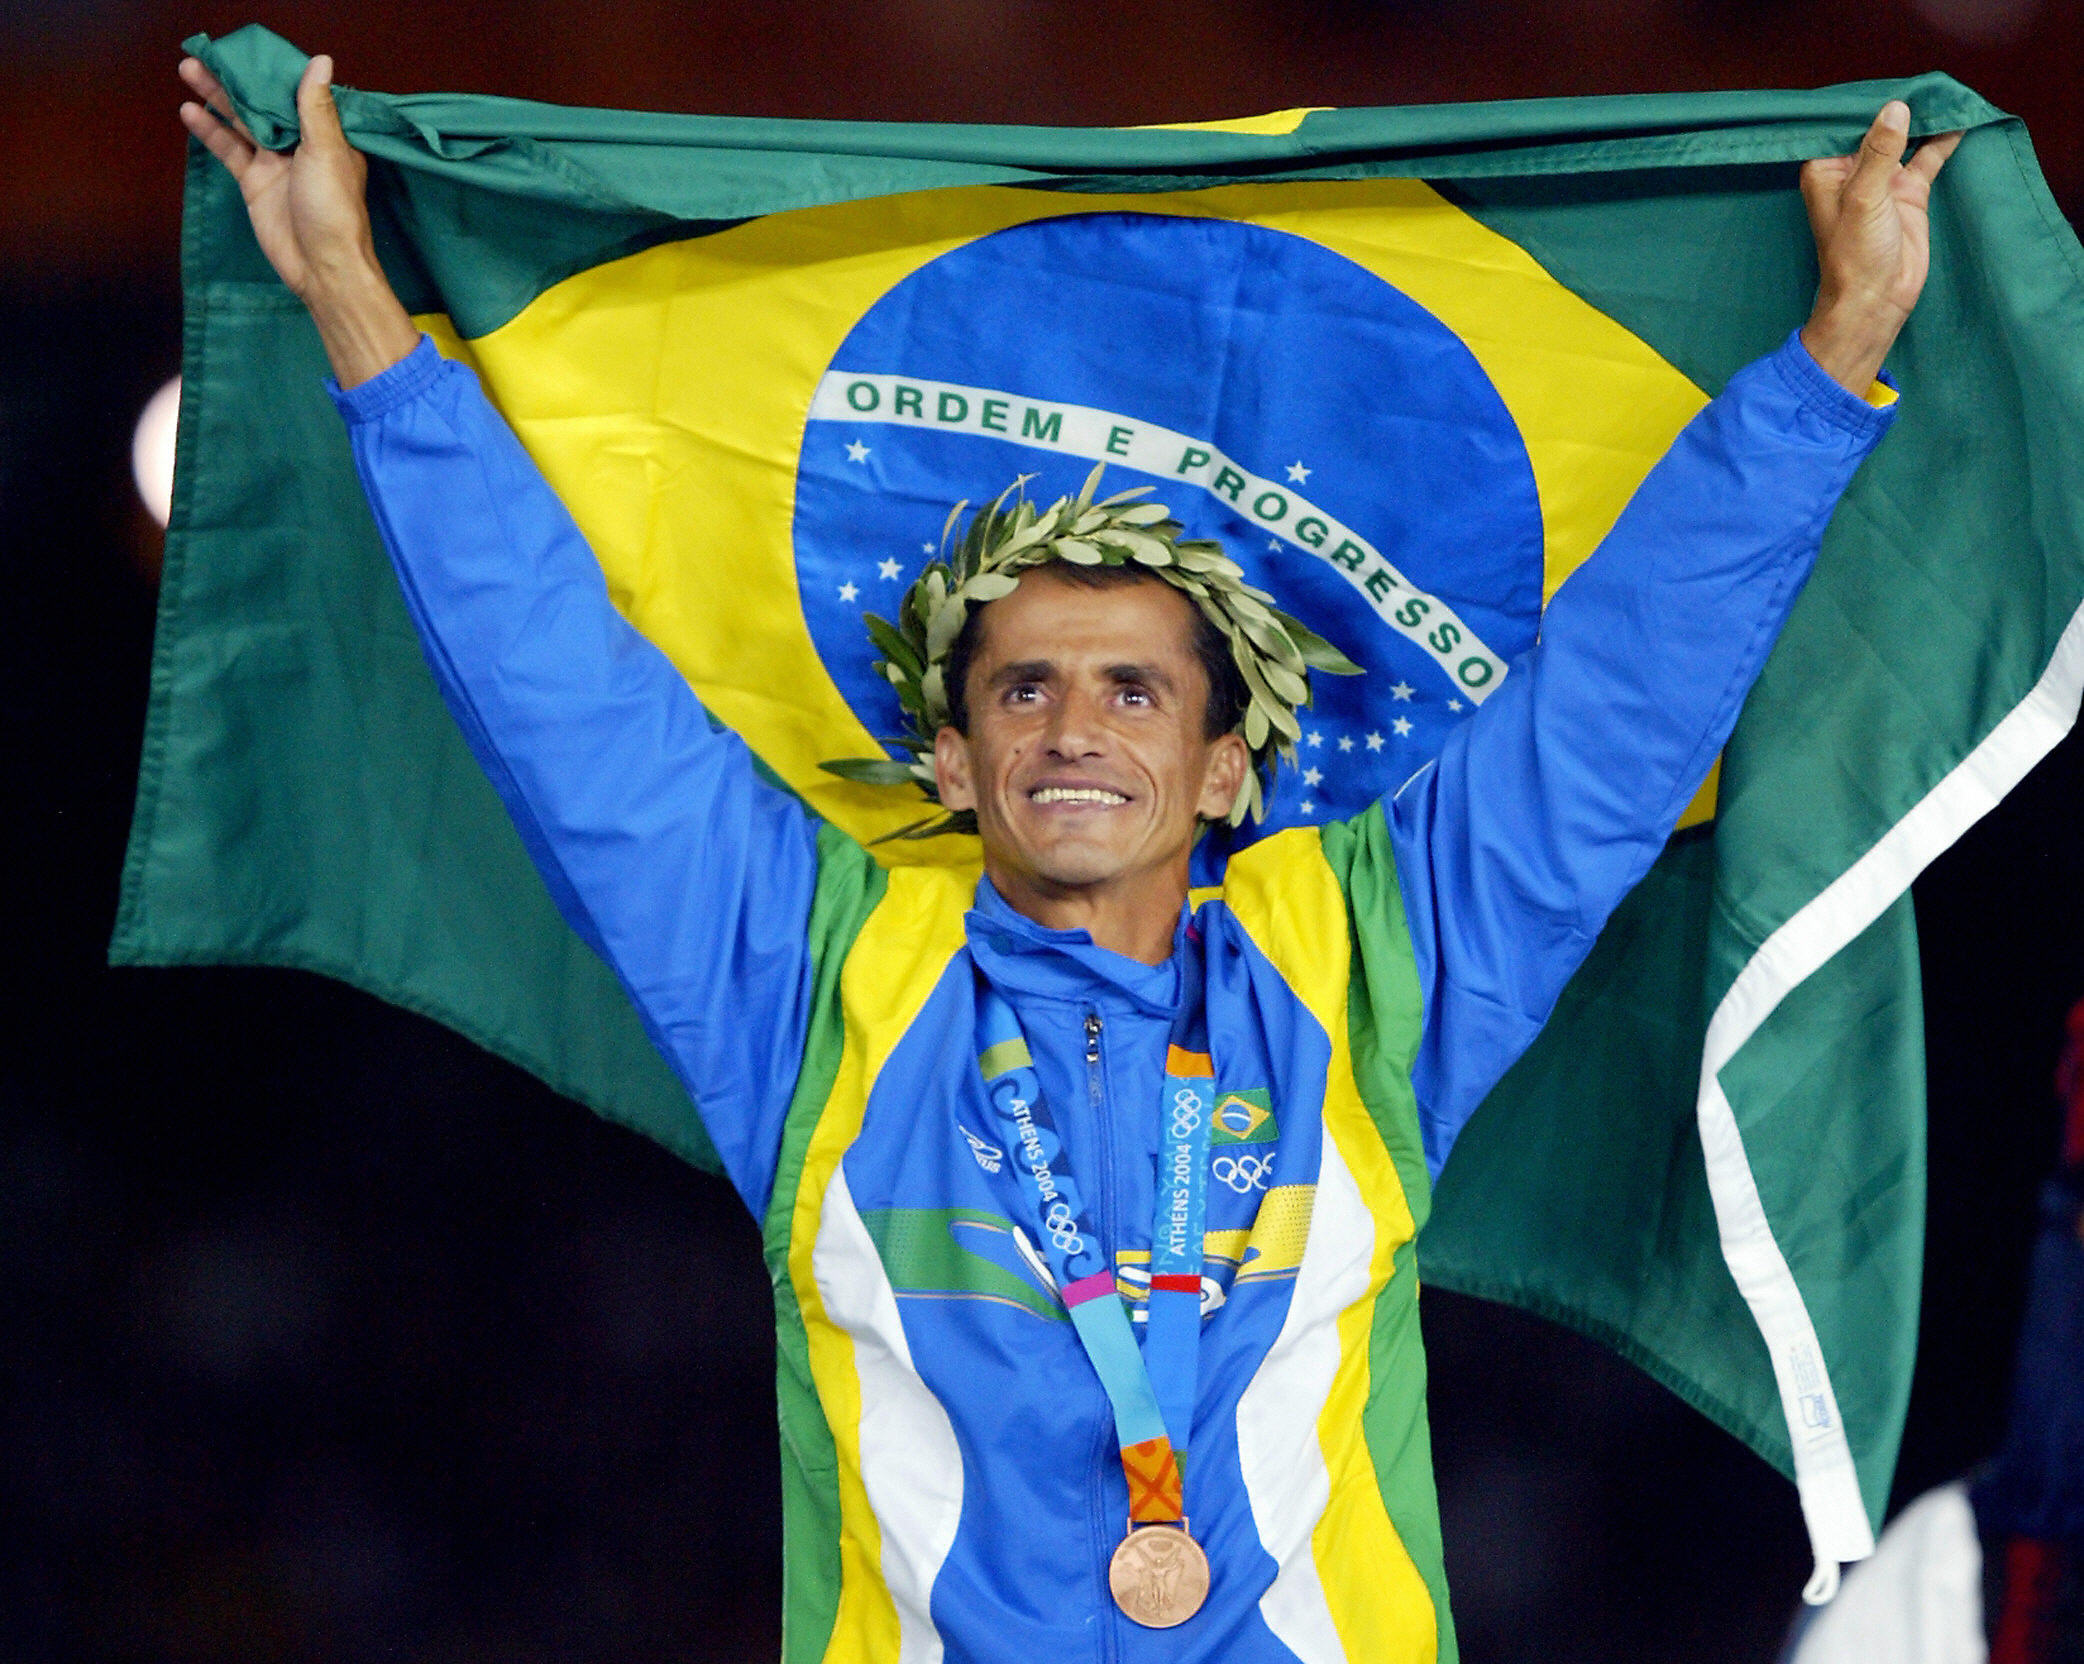 ATHENS, Greece: Men's marathon bronze medal winner Vanderlei de Lima of Brazil stands on the winners' podium 29 August 2004, during the Olympic Games medals ceremony at the Olympic Stadium in Athens. Long-time race leader de Lima was attacked by a spectator in the latter stages of the race but recovered and hung on to win the bronze while Stefano Baldini of Italy won the gold and Mebrahtom Keflezighi of the US took the silver. AFP PHOTO/ADRIAN DENNIS (Photo credit should read ADRIAN DENNIS/AFP/Getty Images)